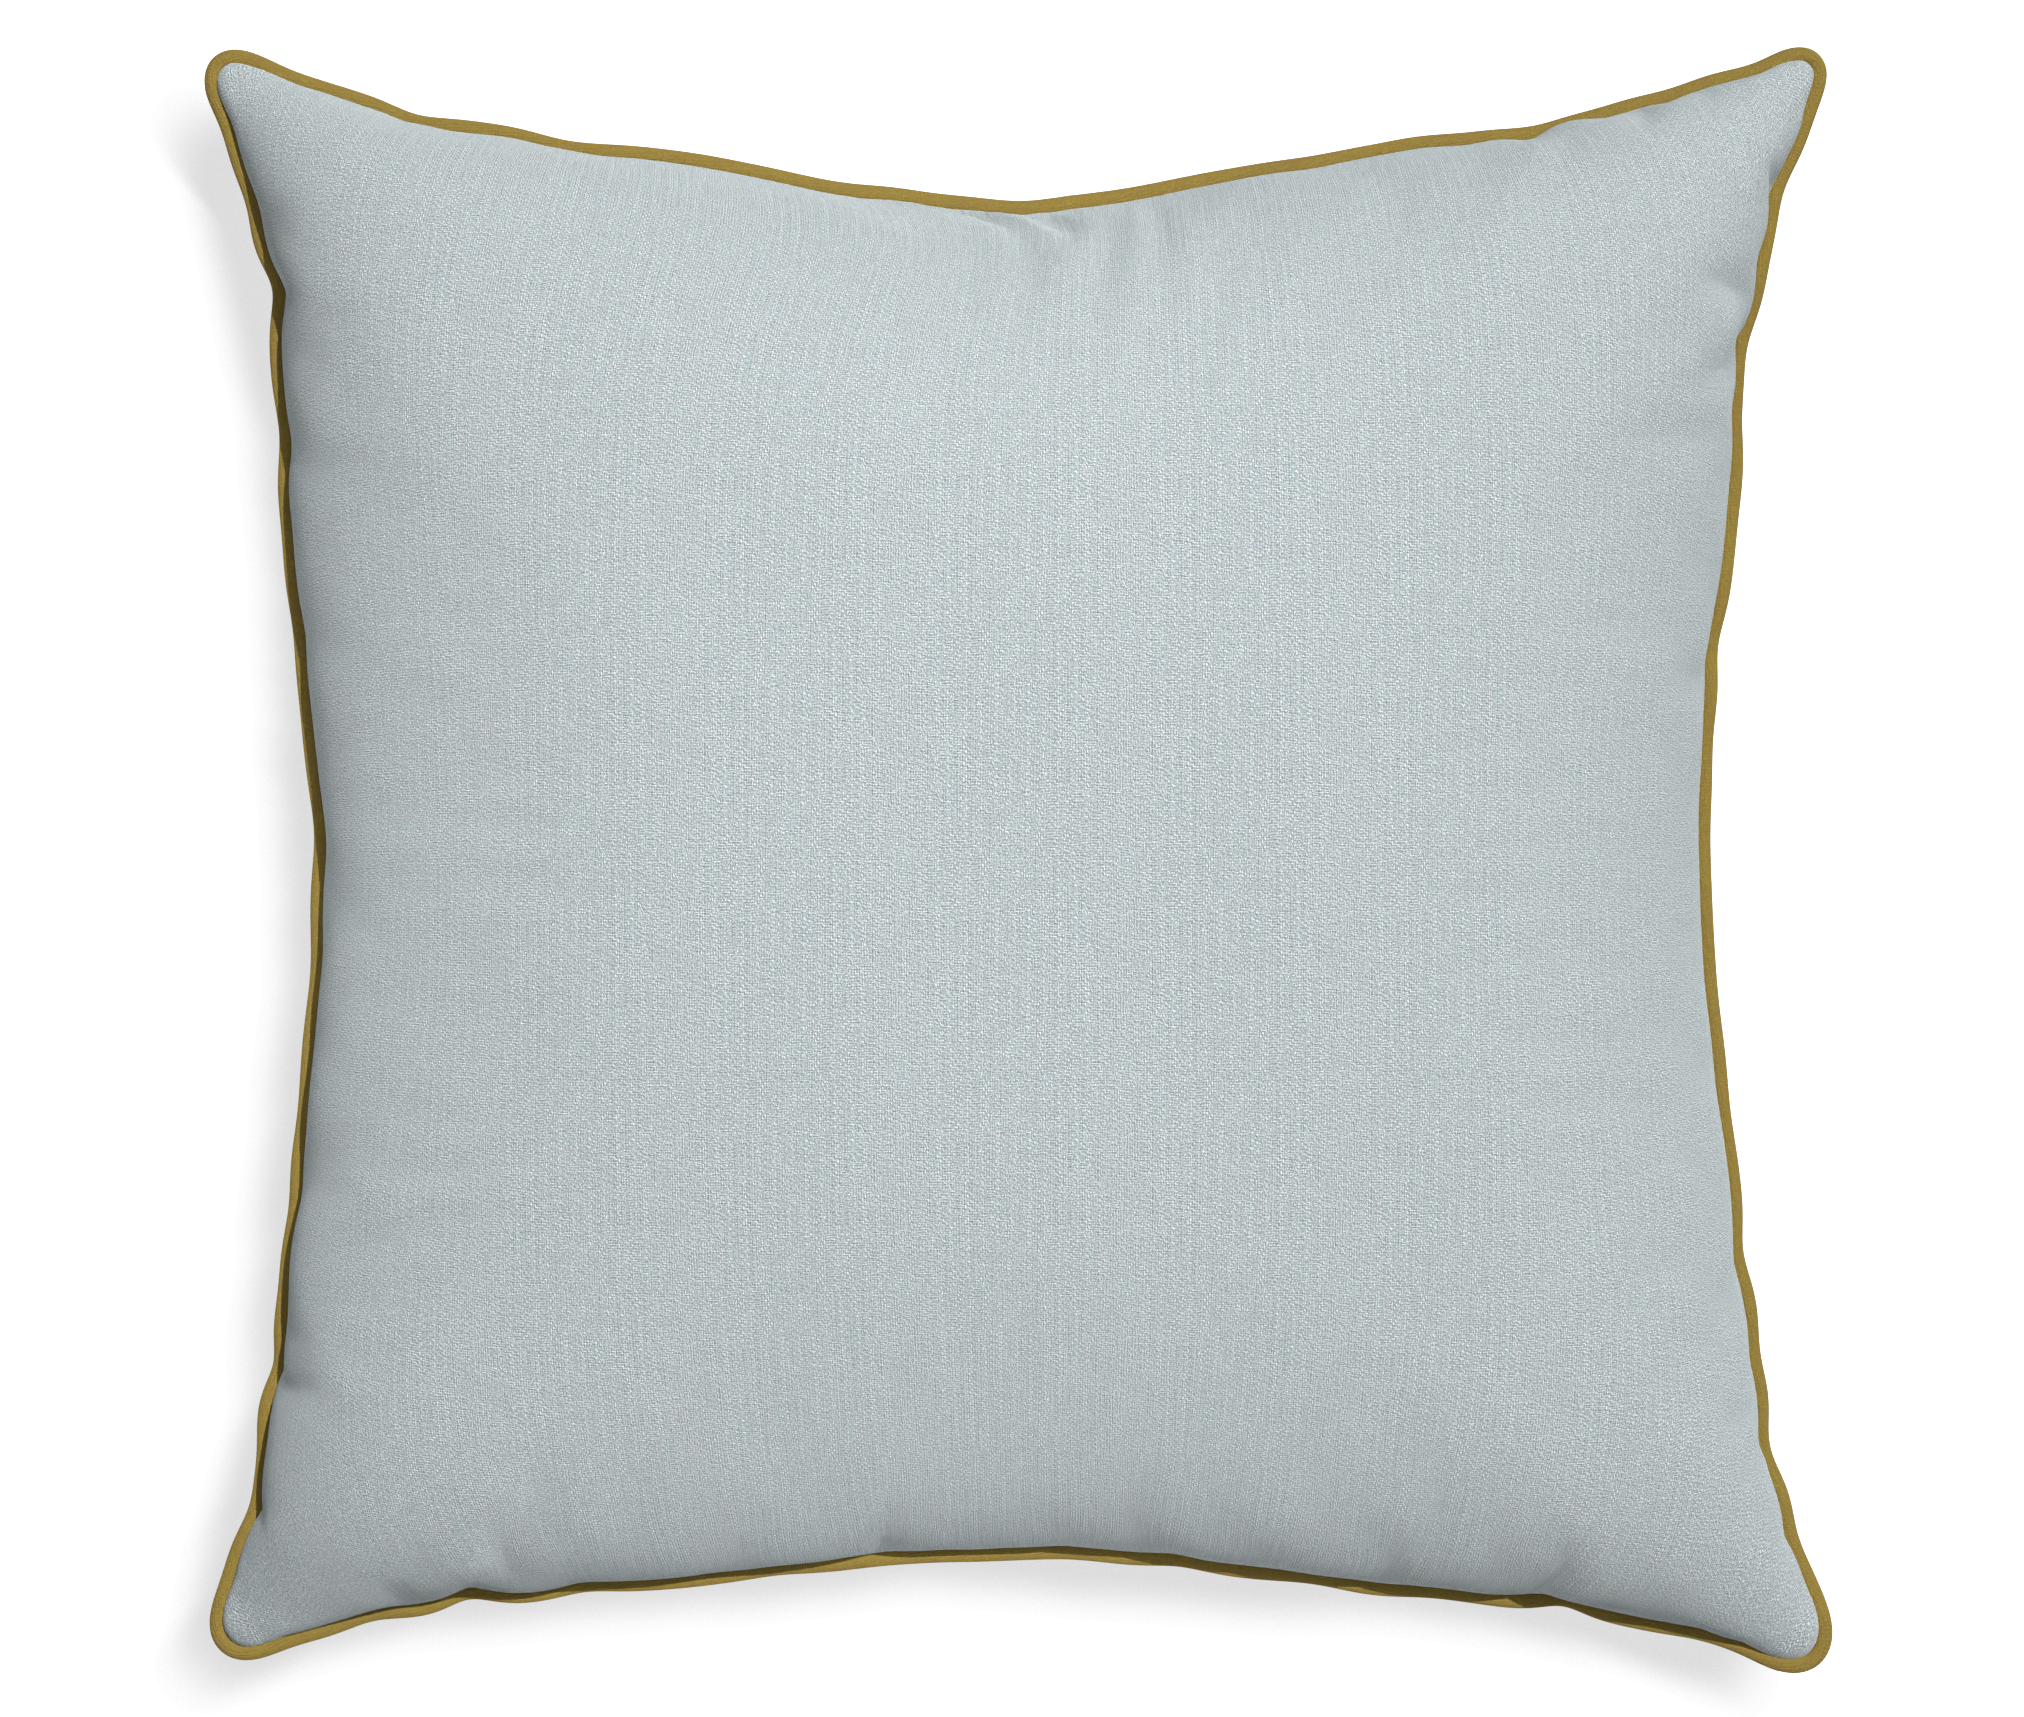 Light blue euro sham pillow with chartreuse piping on a white background